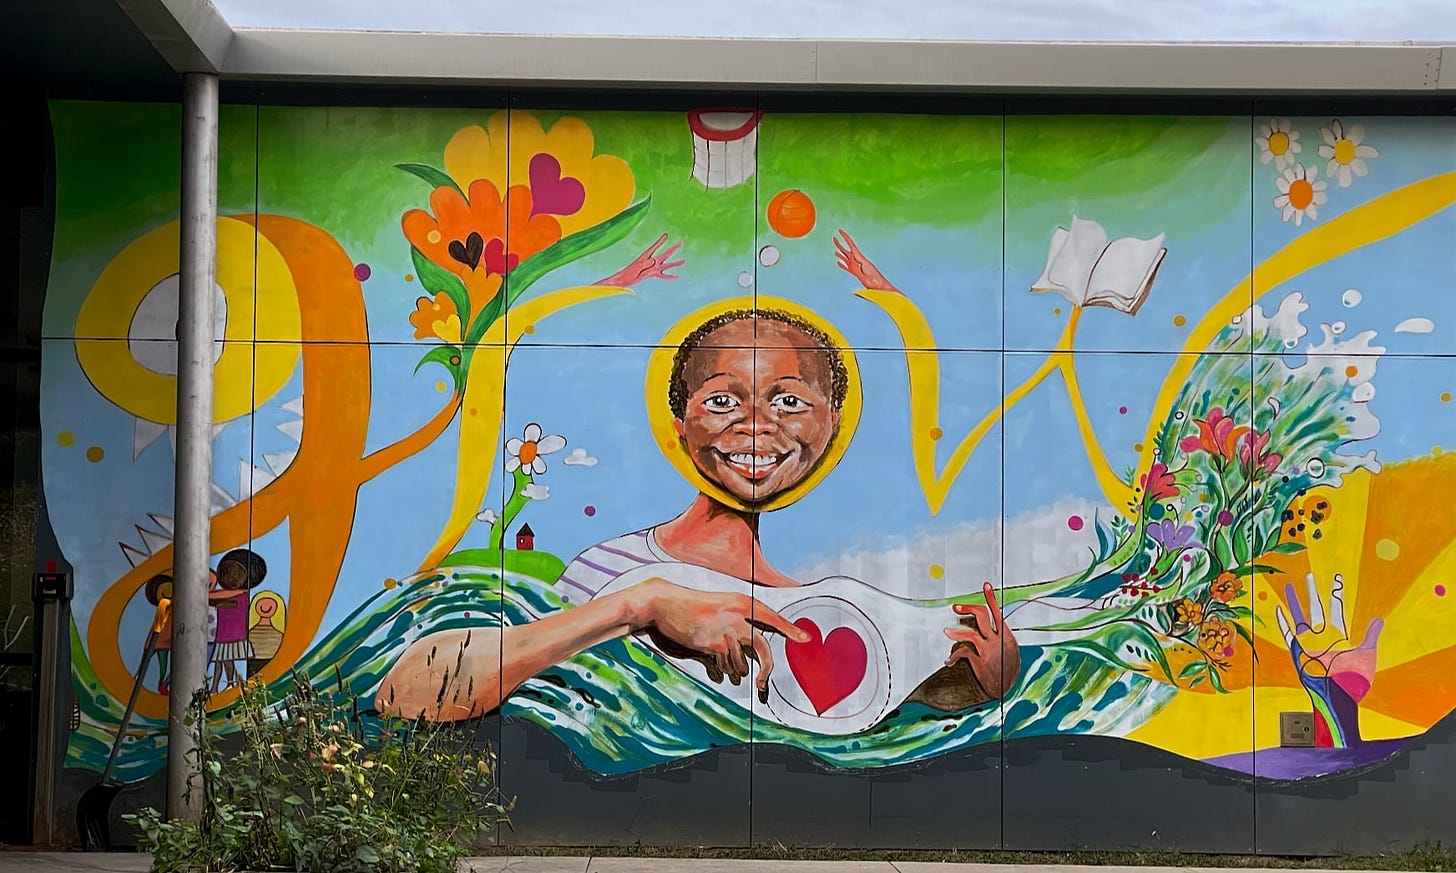 Mural with the word grow that shows a Black boy with his smiling face within the small “o”. He is holding an object in a way similar to how a guitar is typically held. There is a heart in the middle and a bouquet of flowers at the end. Other elements includes children interact, a green wave, a basketball, a book, a hand with sunshine coming out of it, and flowers.